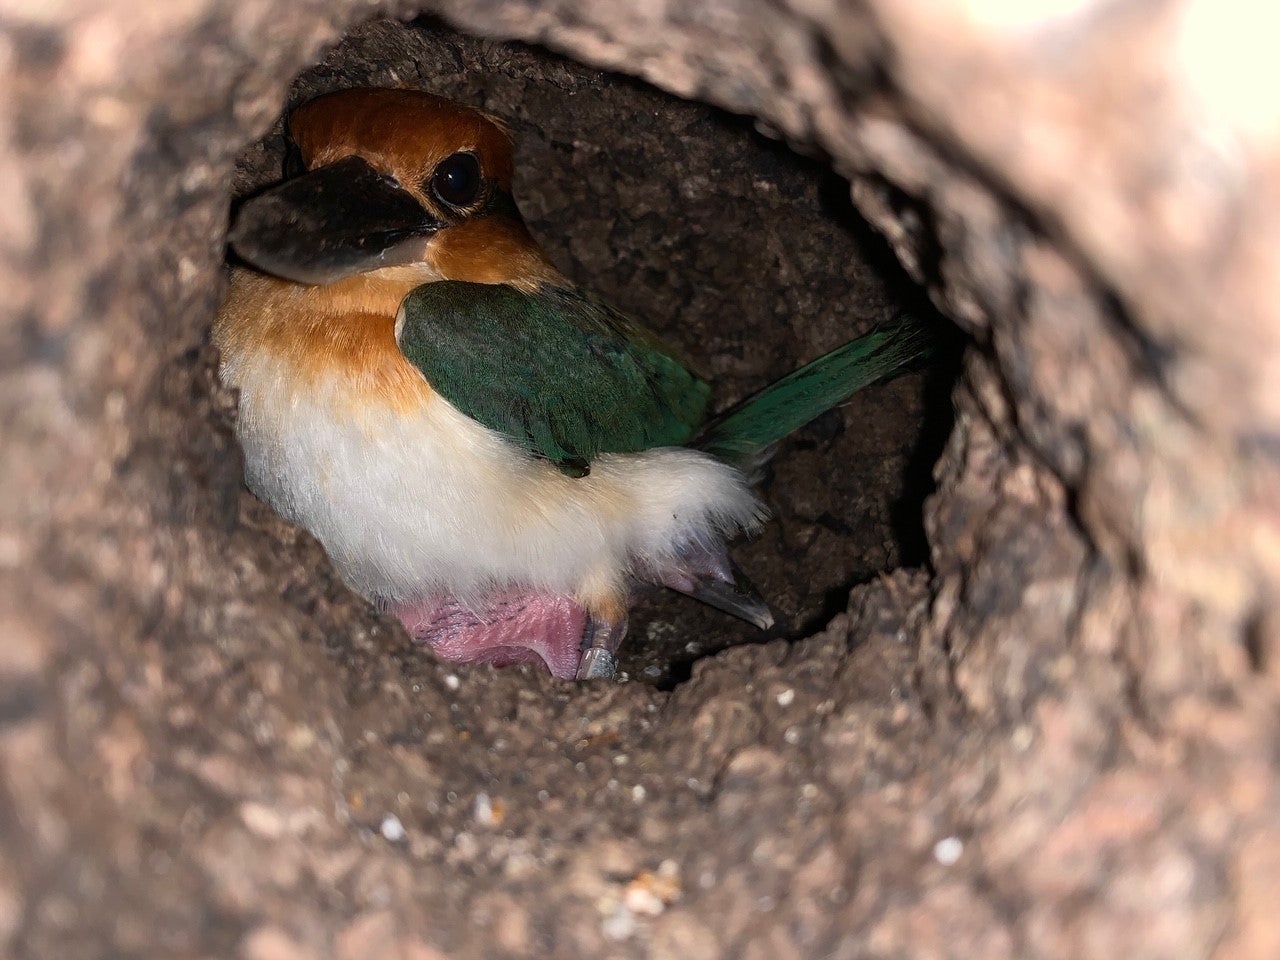 A small bird, called a Guam kingfisher, with a large bill and colorful feathers incubates its recently hatched chick inside a small nest cavity excavated in a cork nesting box.